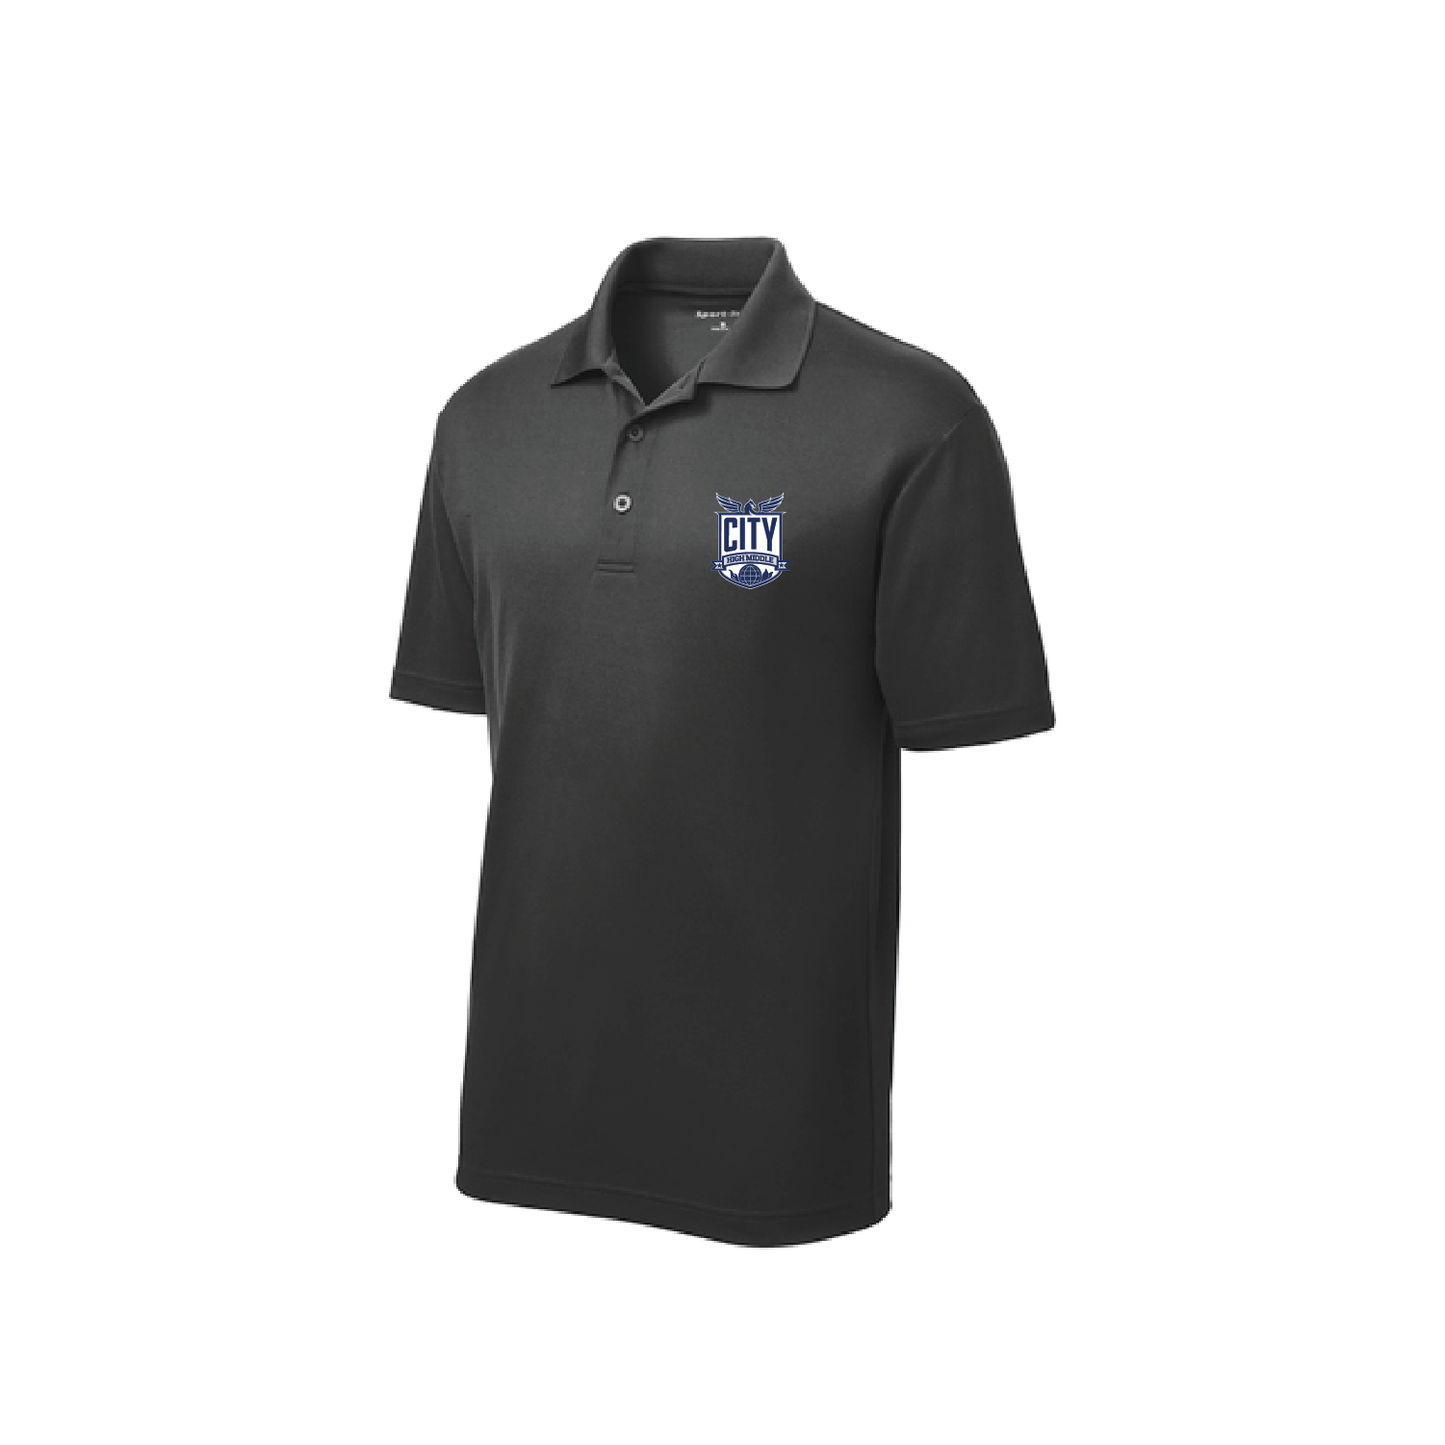 City High Middle Youth Short Sleeve Polo (YST640)